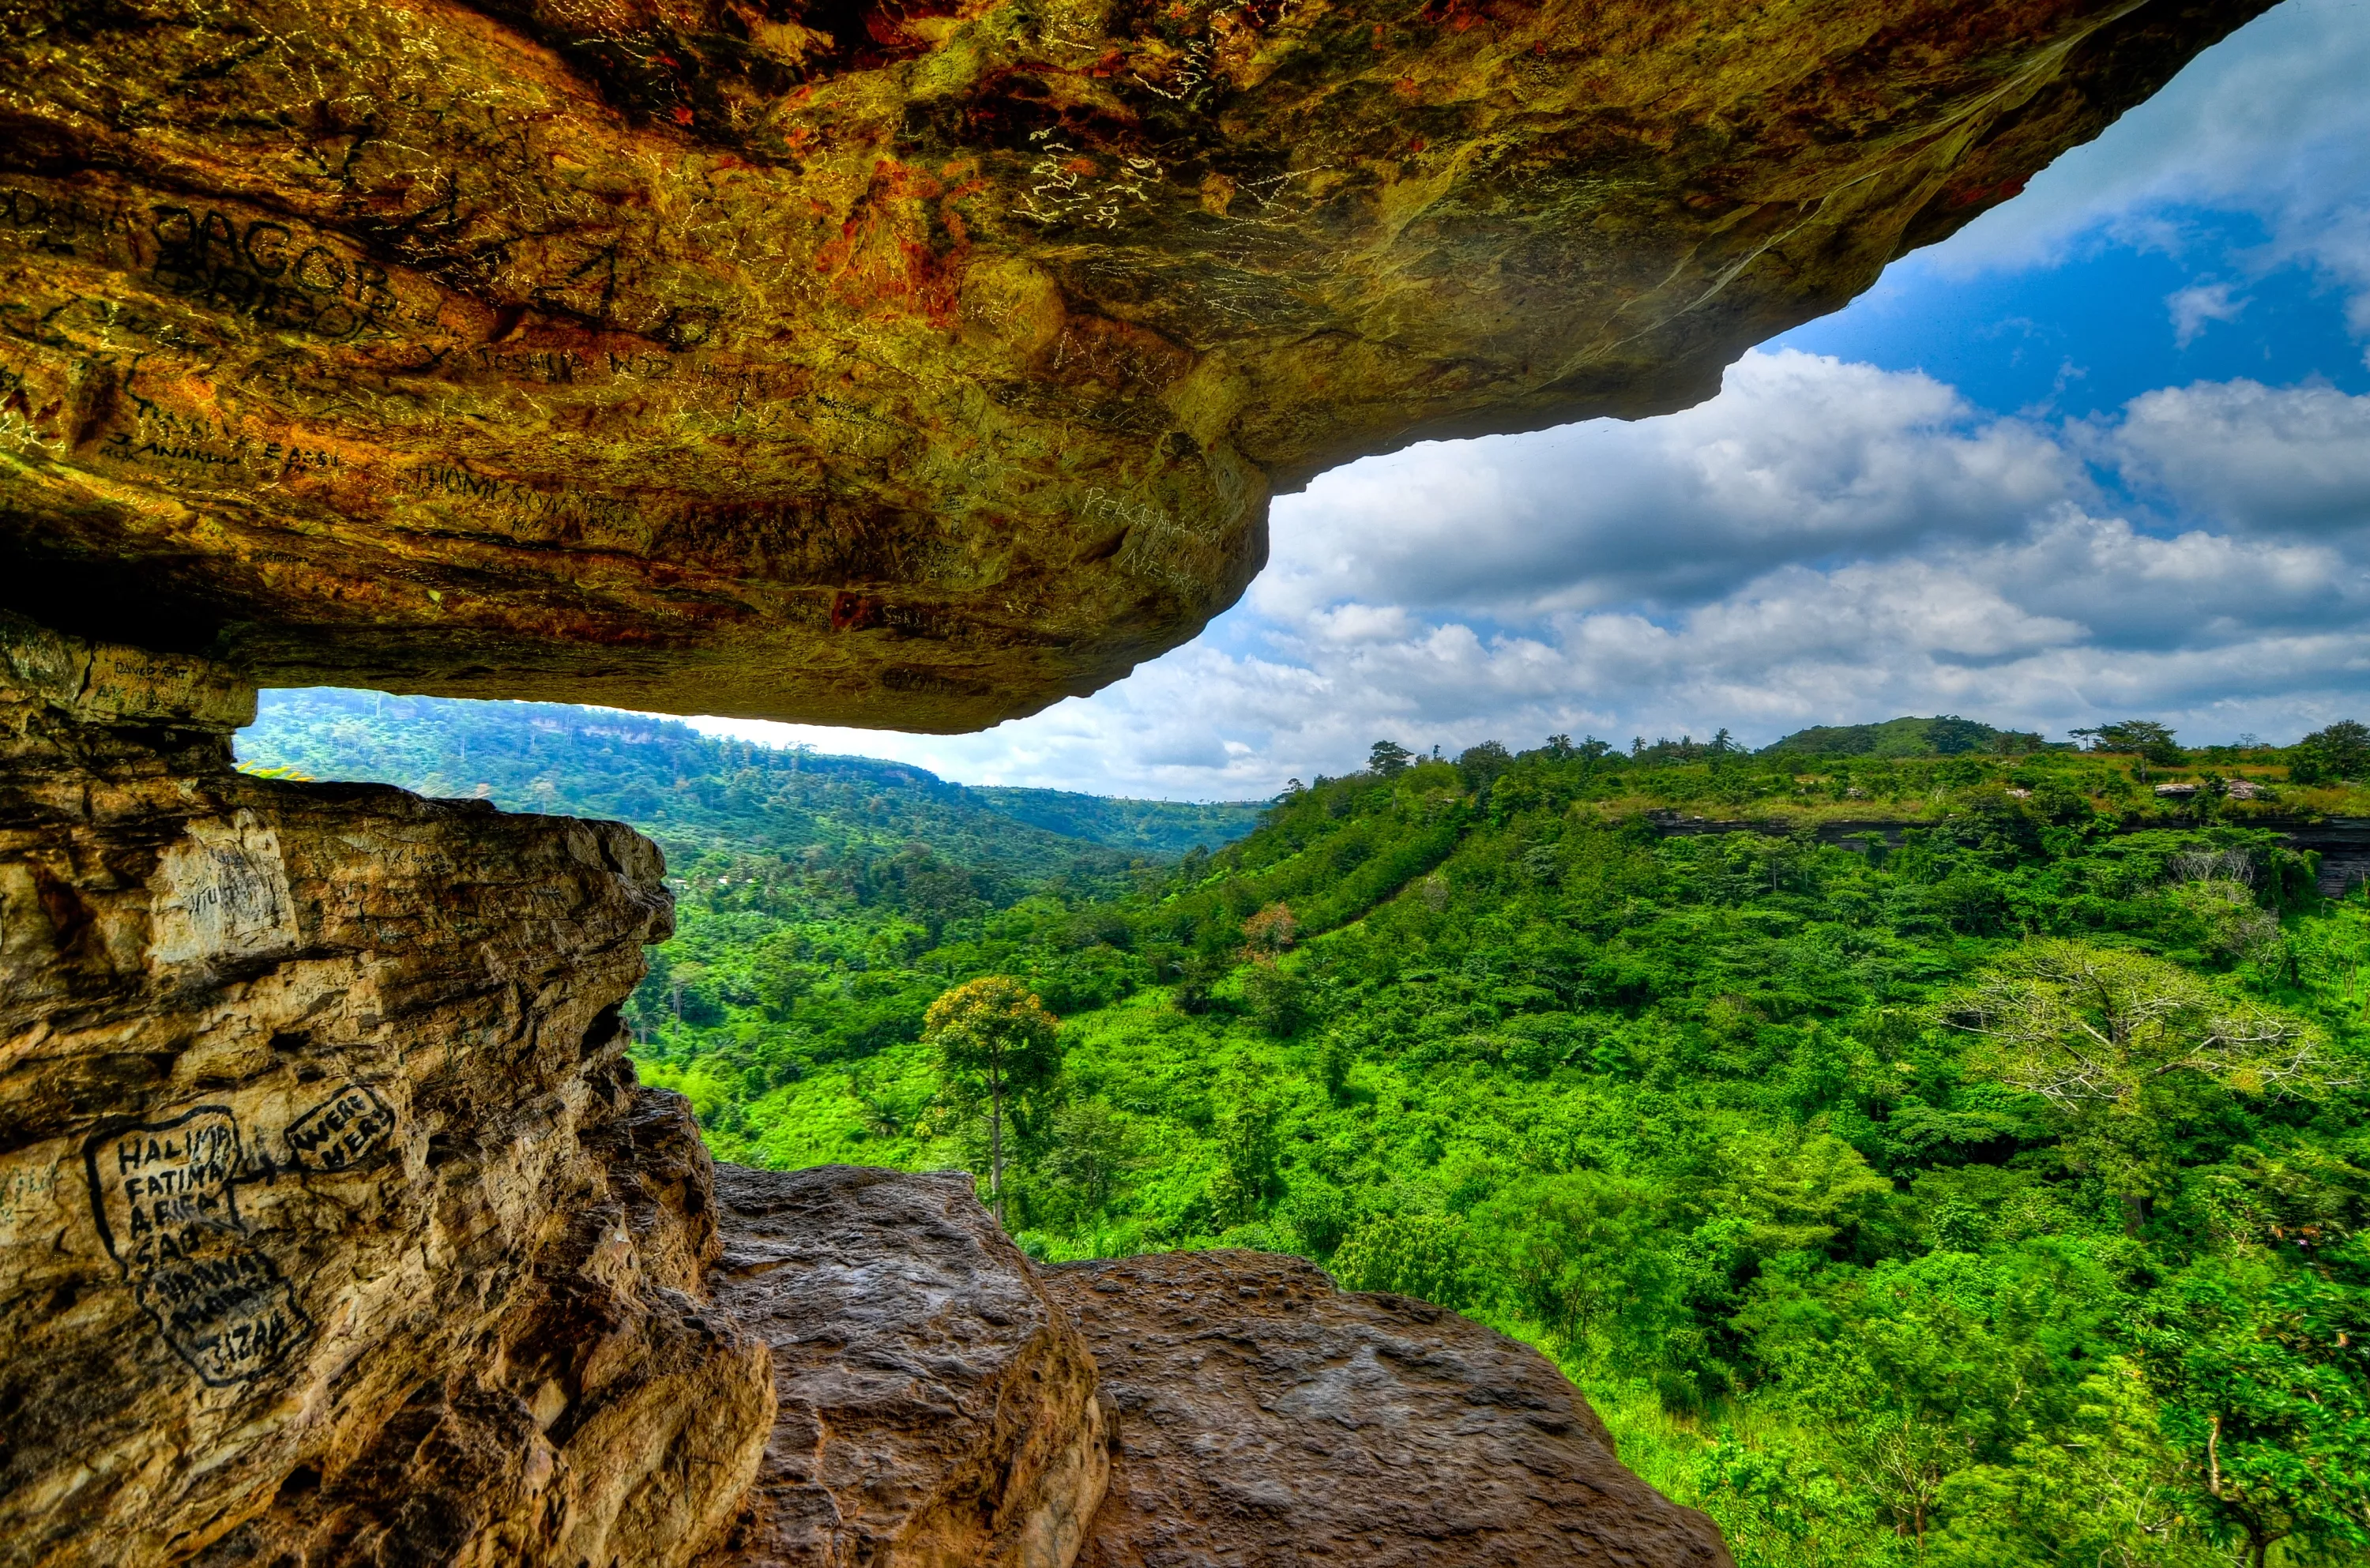 Umbrella Rock in Ghana, Africa | Nature Reserves - Rated 0.8